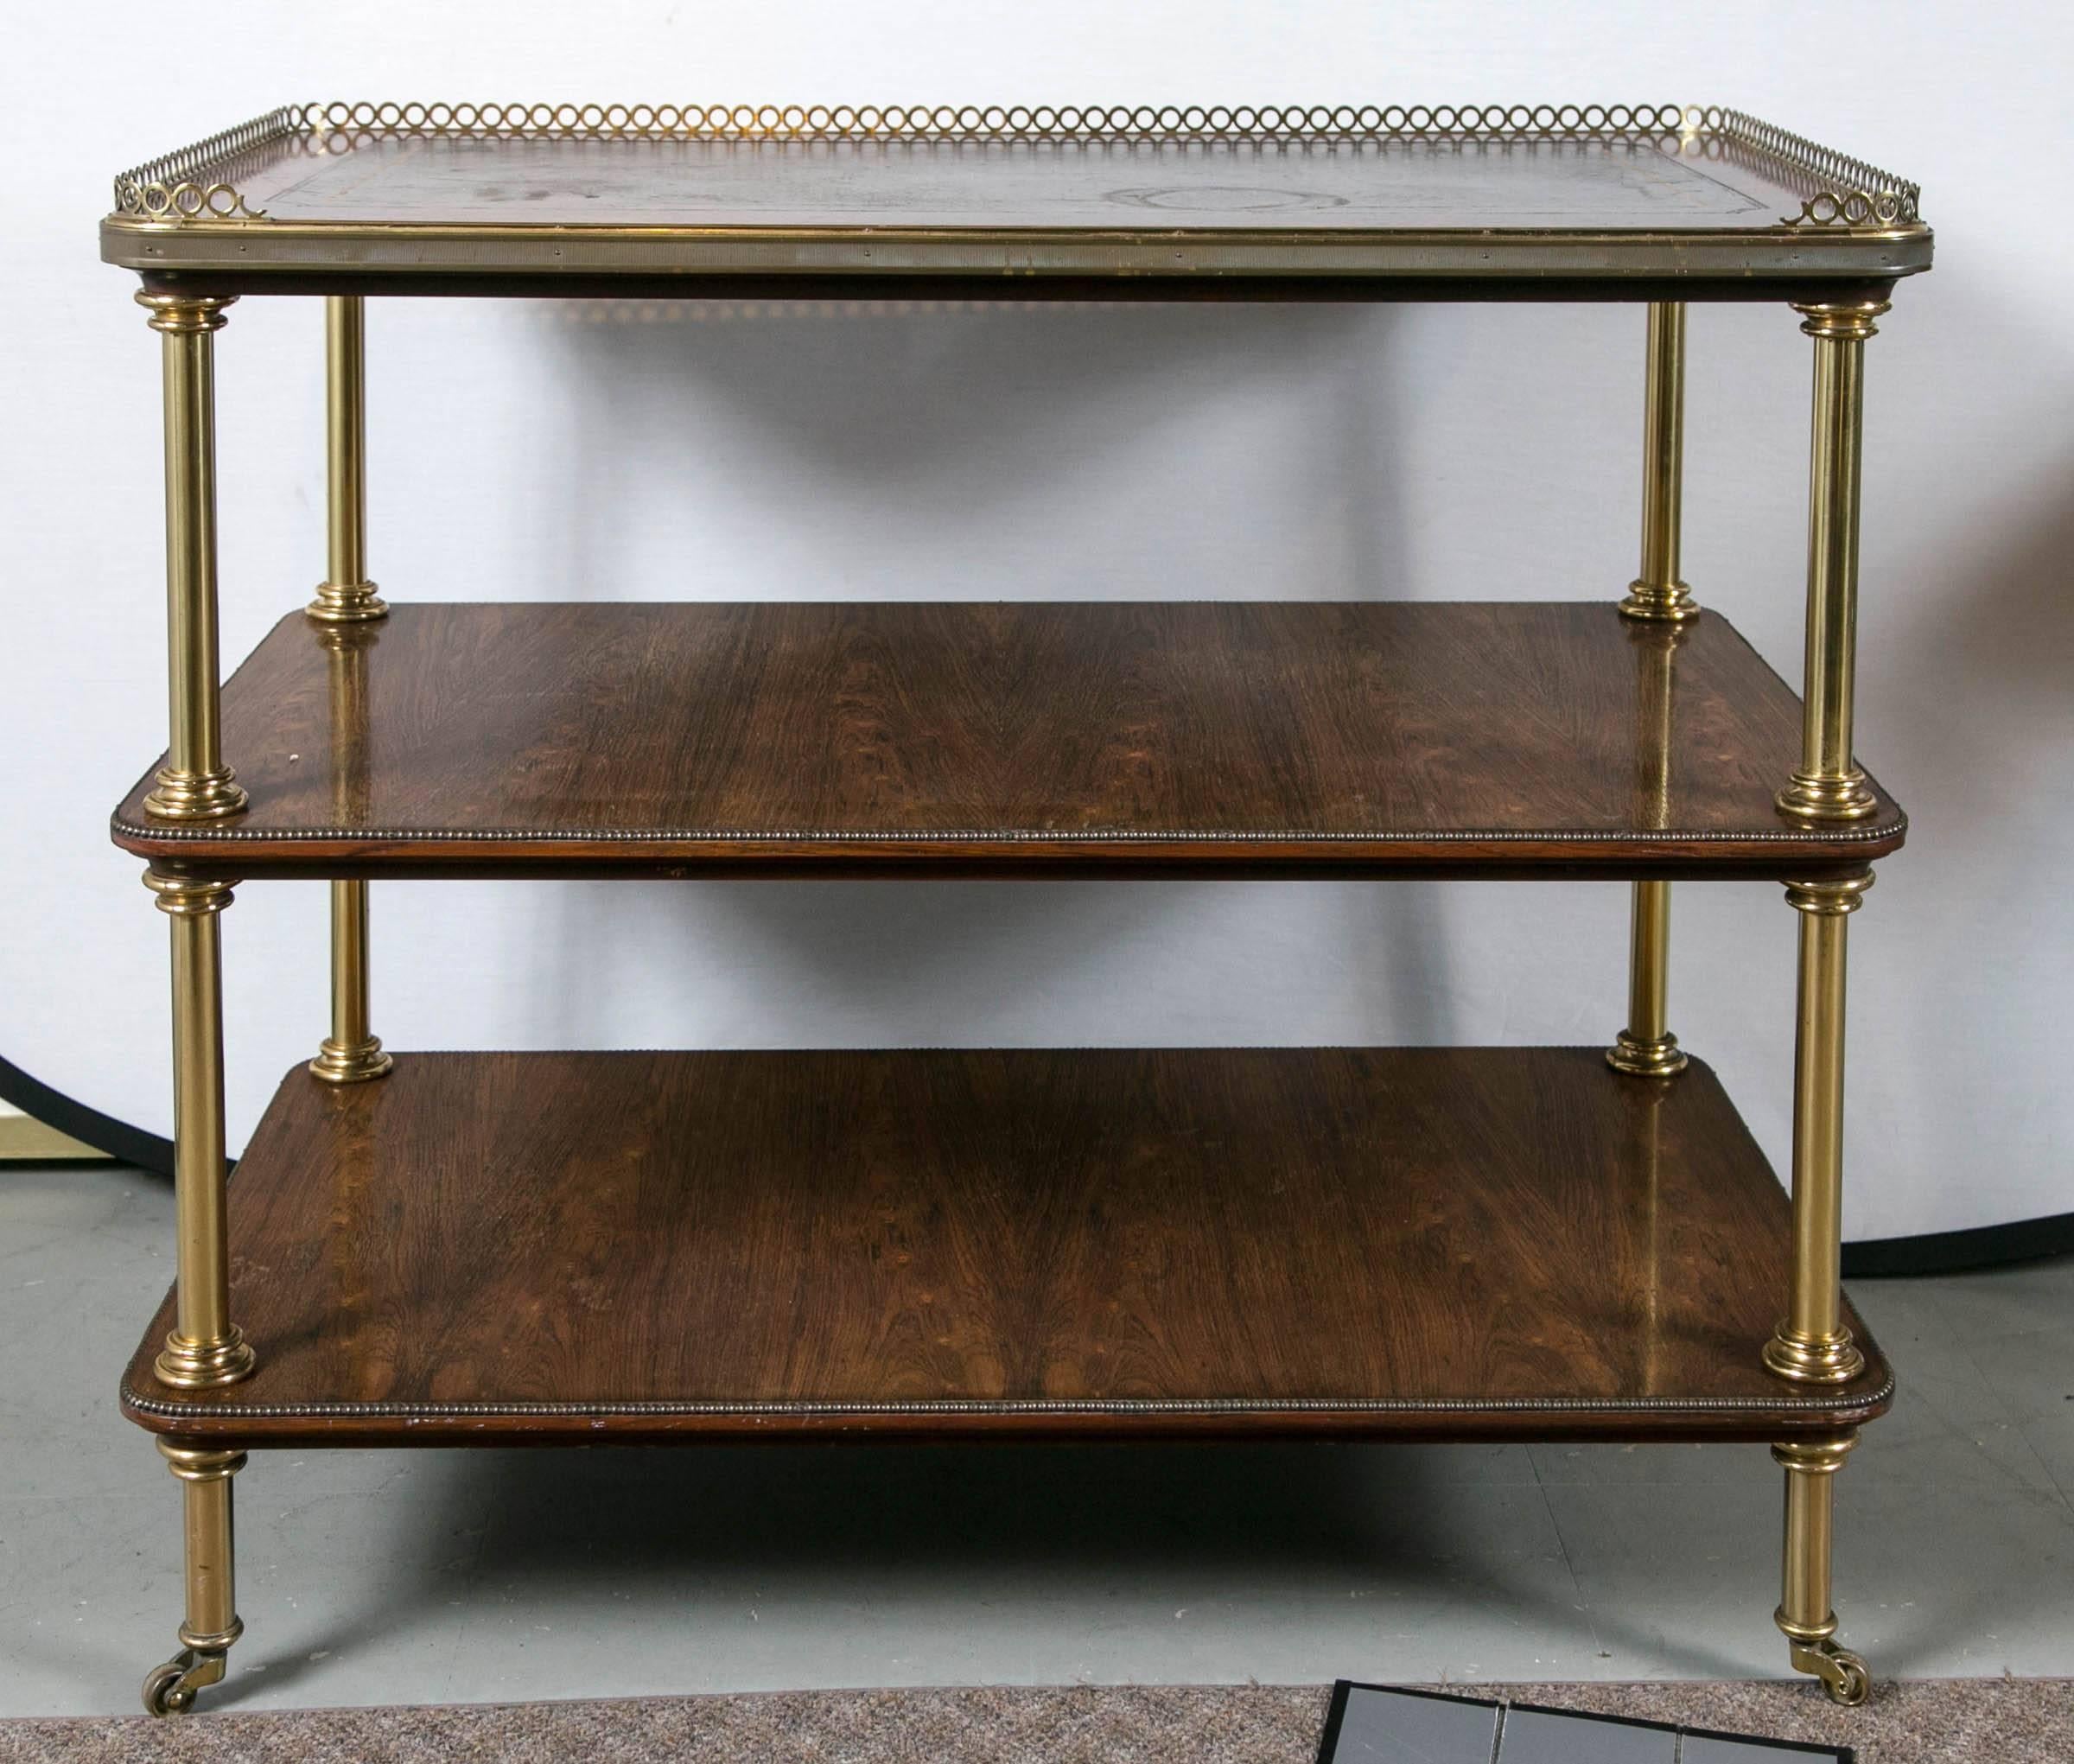 Baker rosewood three-shelf cart with brass accents and casters, circa 1960s.